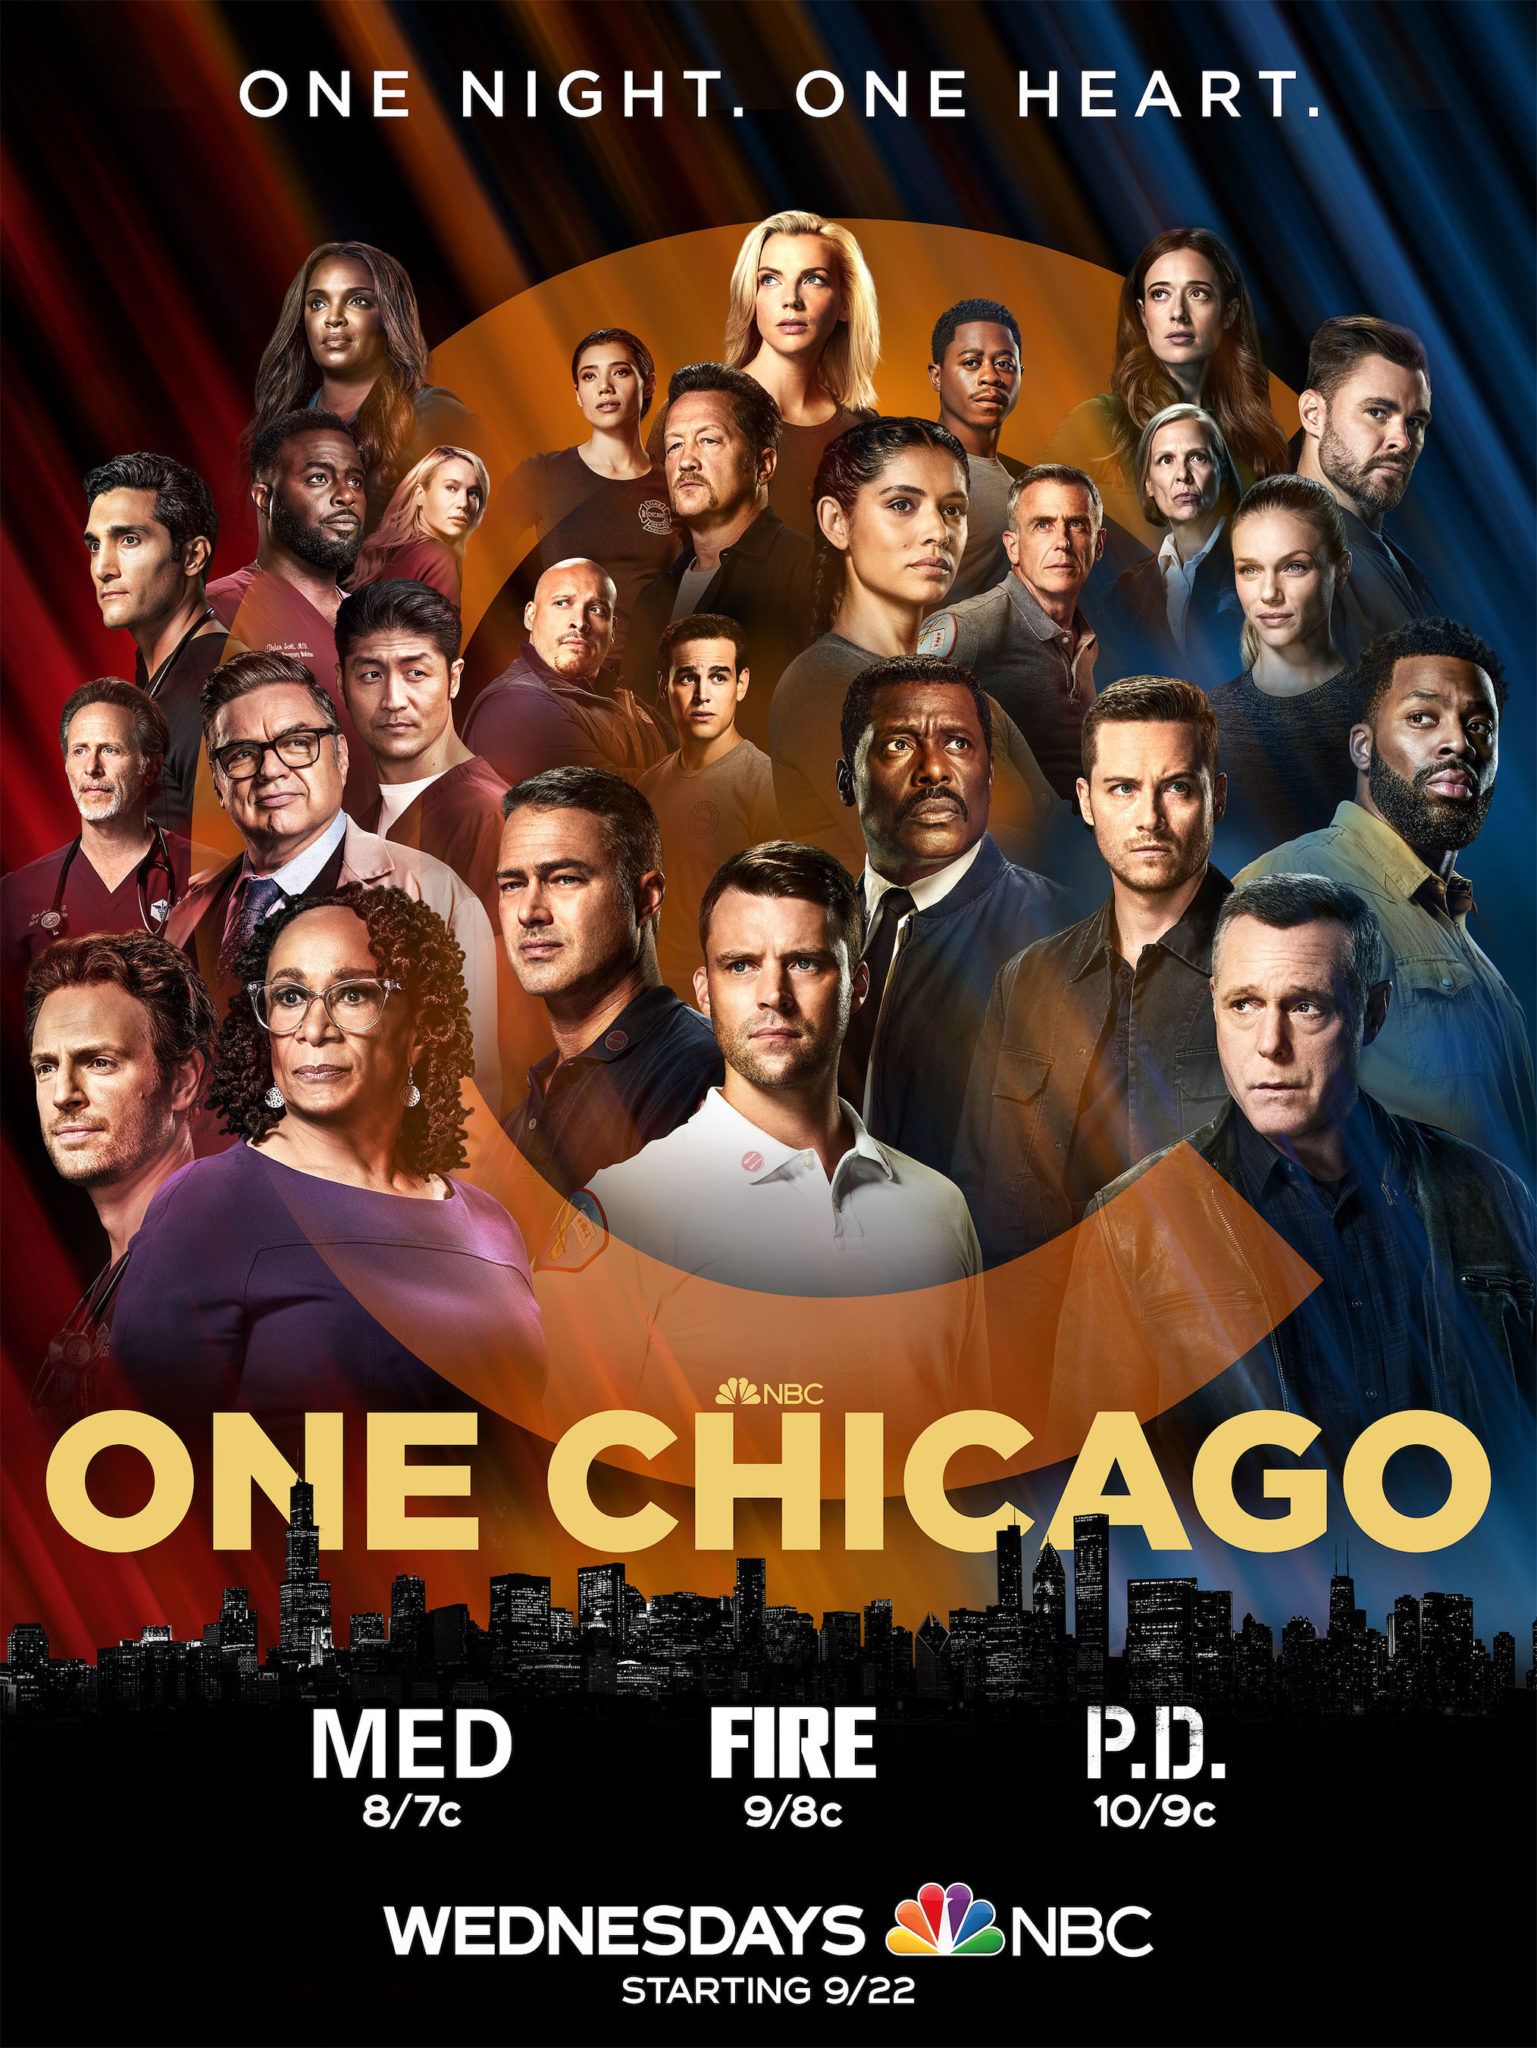 One Chicago Highlights the 'Heart' of 'Med,' 'Fire' & 'P.D.' in New